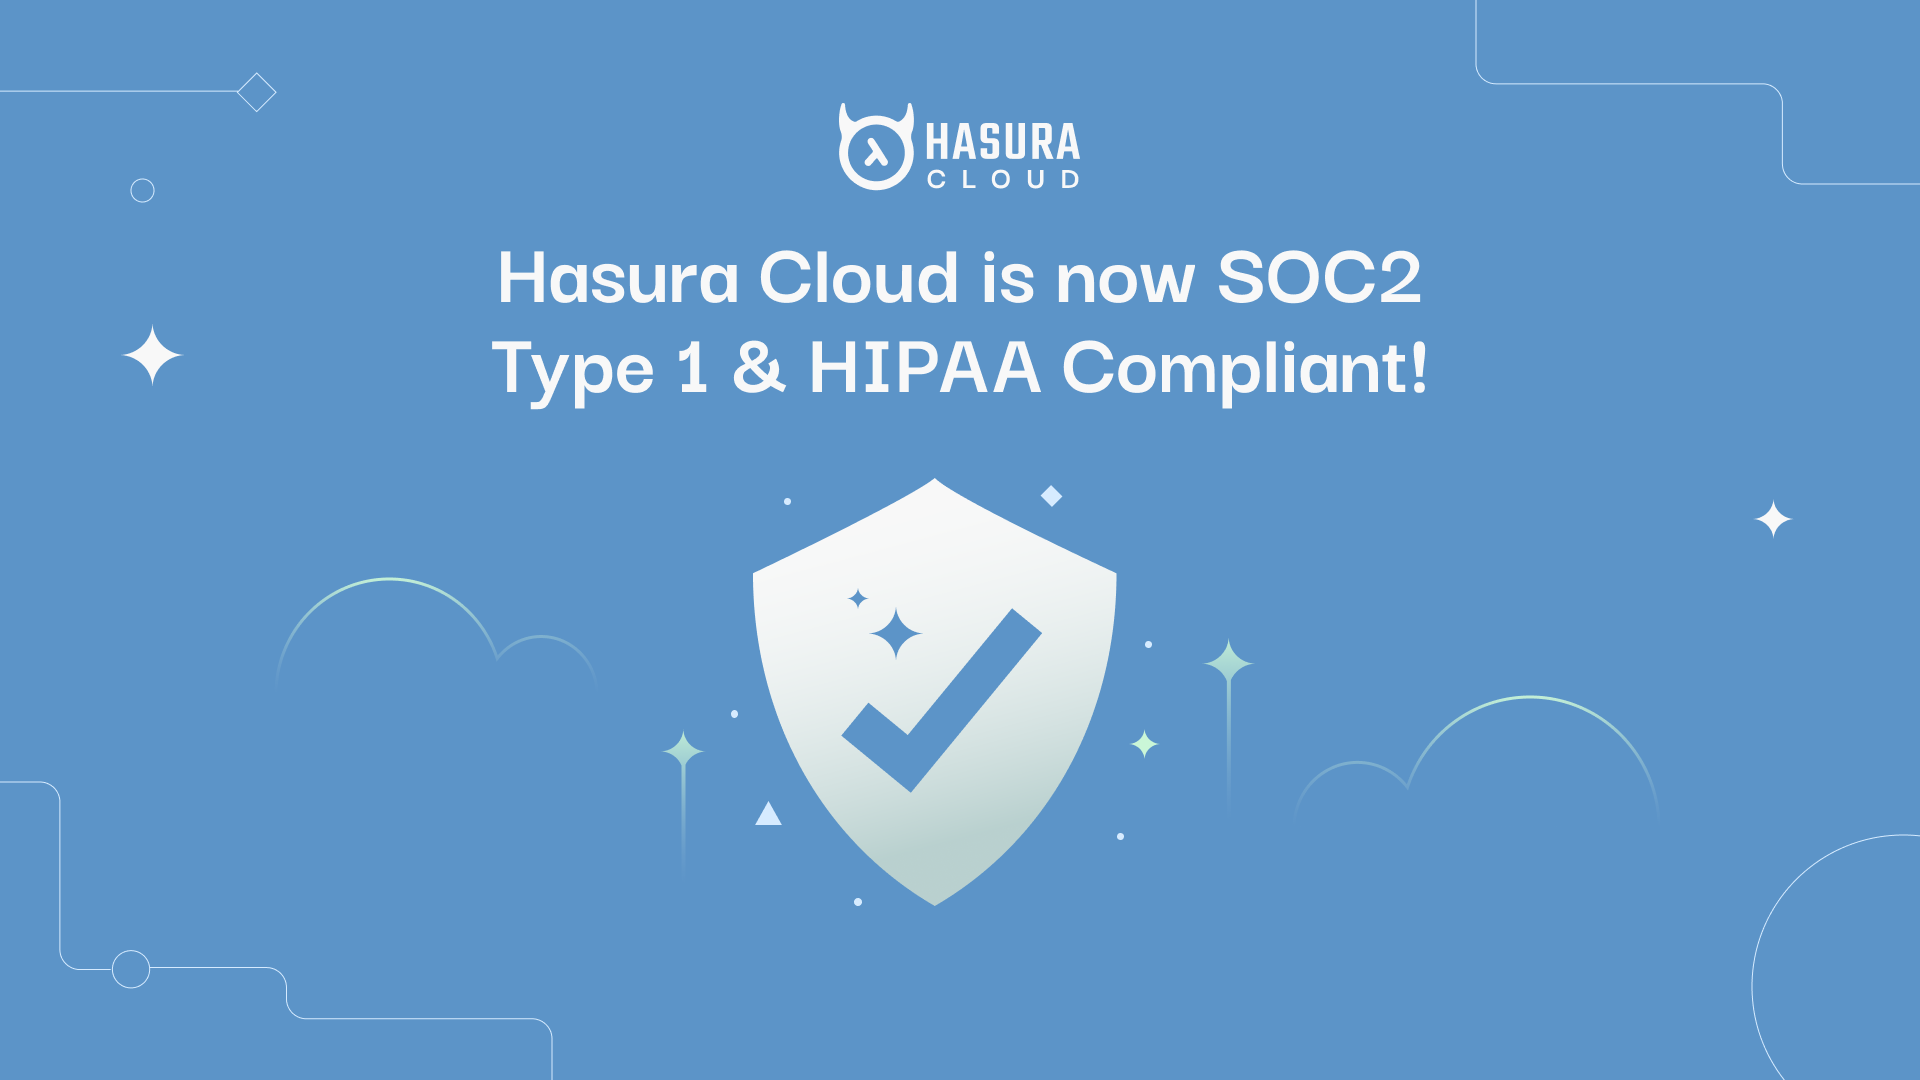 Announcement: Hasura Cloud Achieves SOC2 Type 1 and HIPAA Compliance Certifications